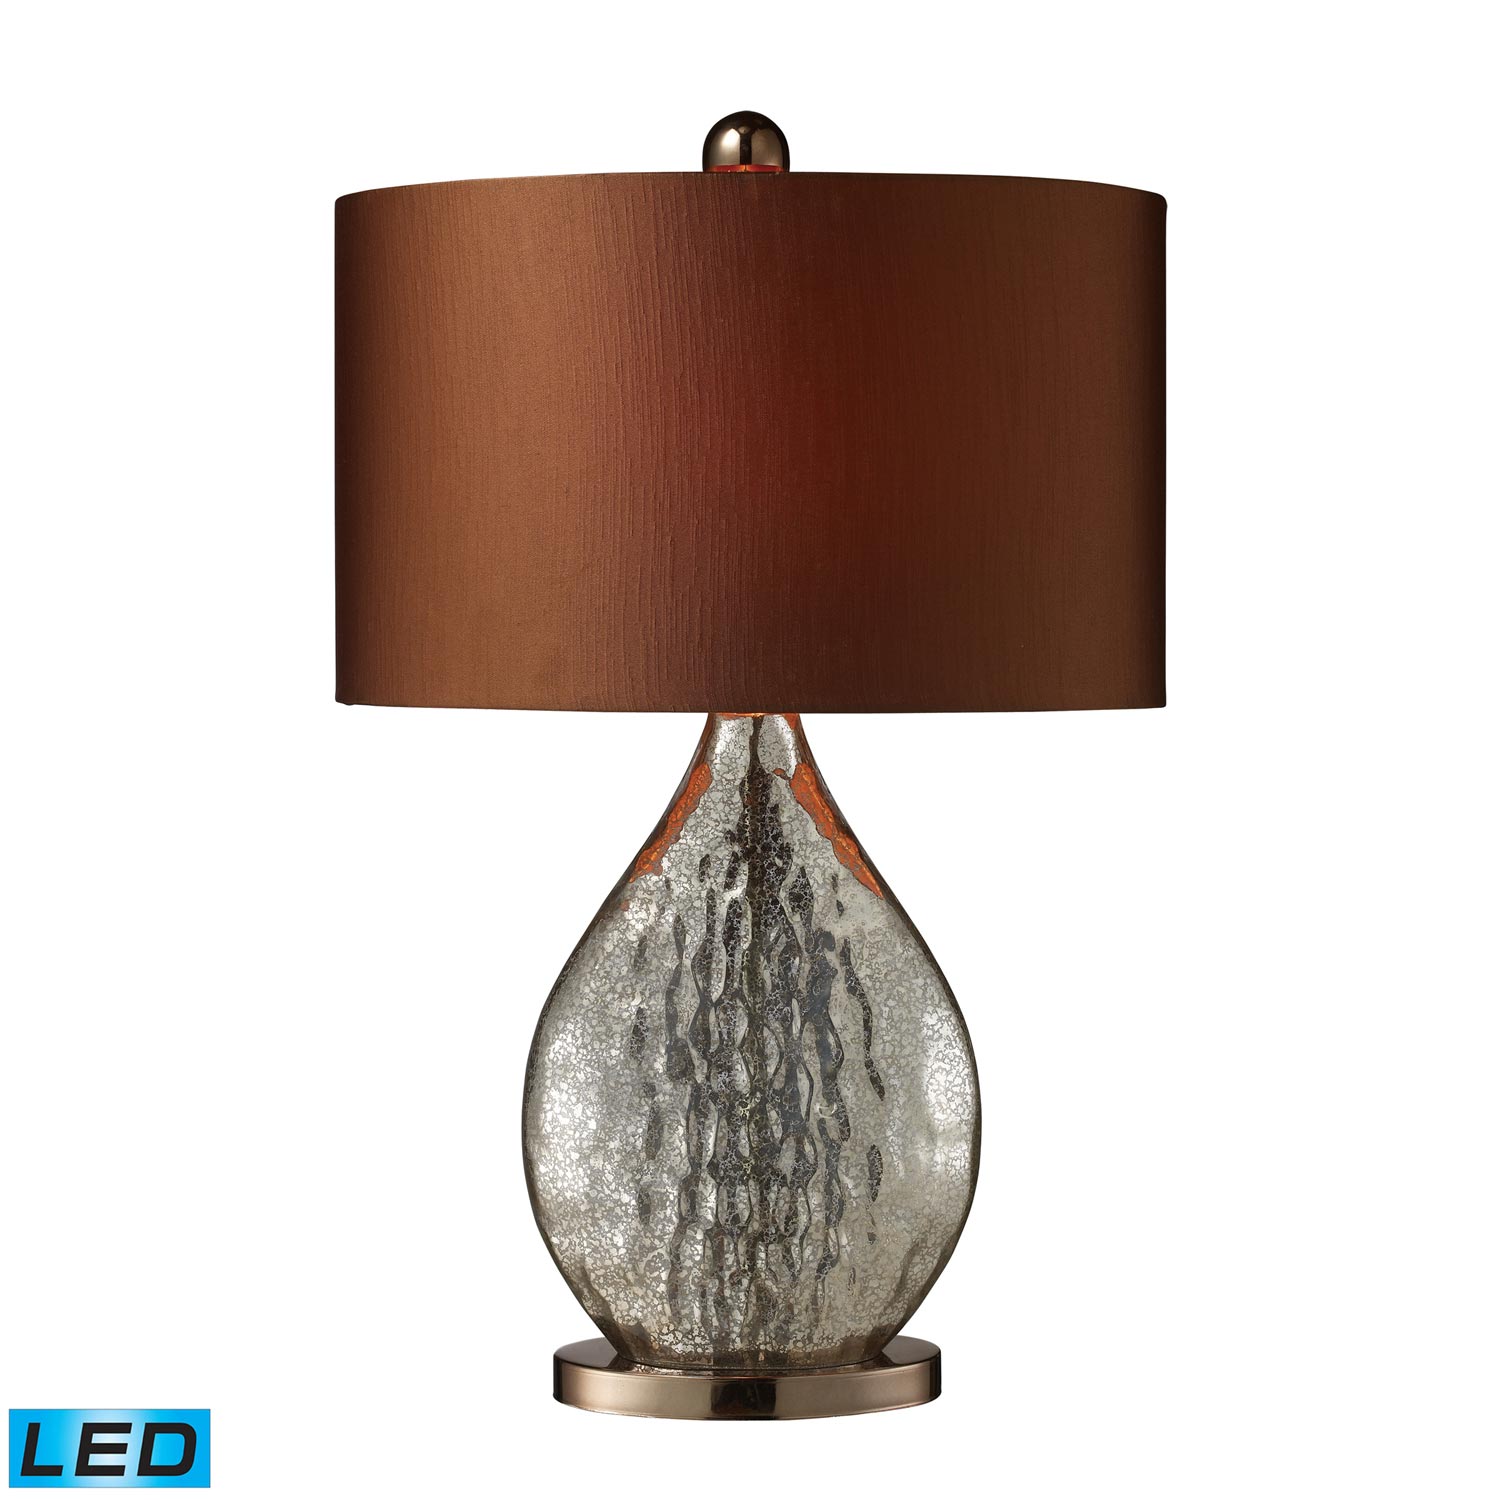 Elk Lighting D1889-LED Sovereign Table Lamp - Antique Mercury Glass with Coffee Plating